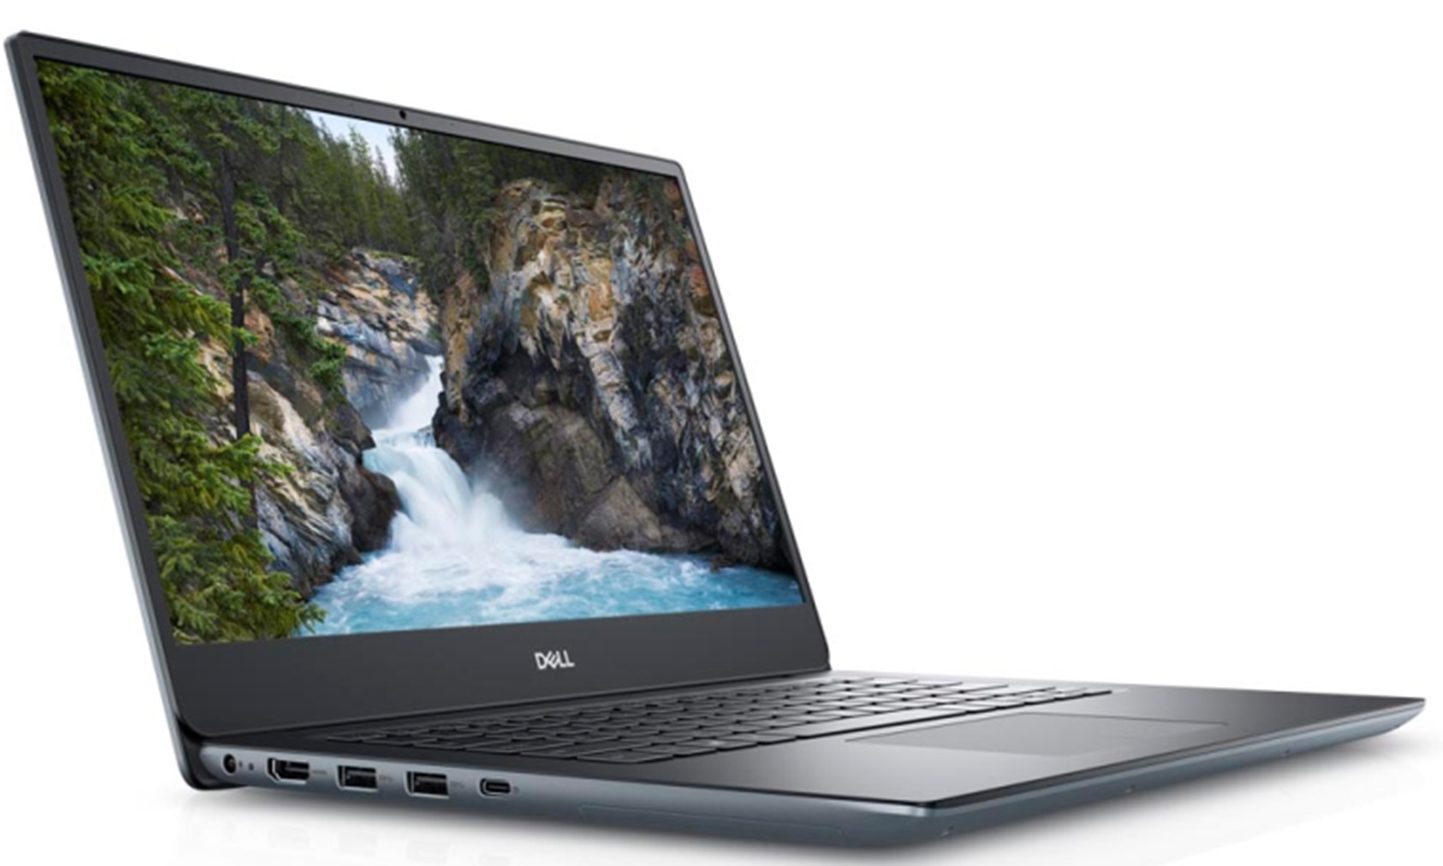 Dell Vostro 5490 review - a hodgepodge between an XPS and a 